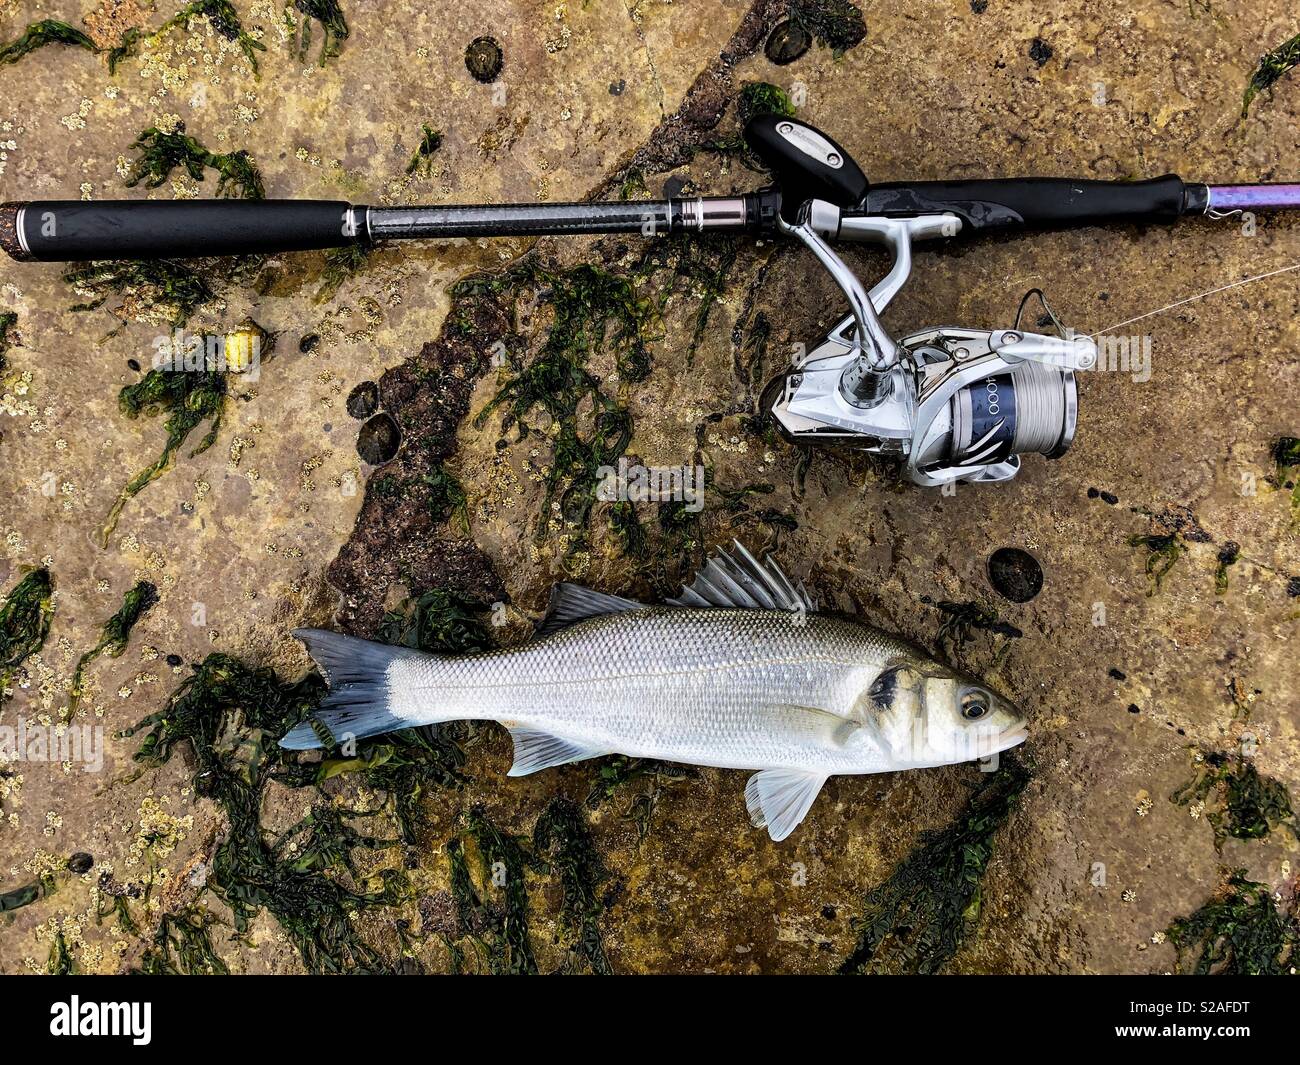 Live Sea bass with rod and reel used to catch it, Gower, South West Wales. Stock Photo